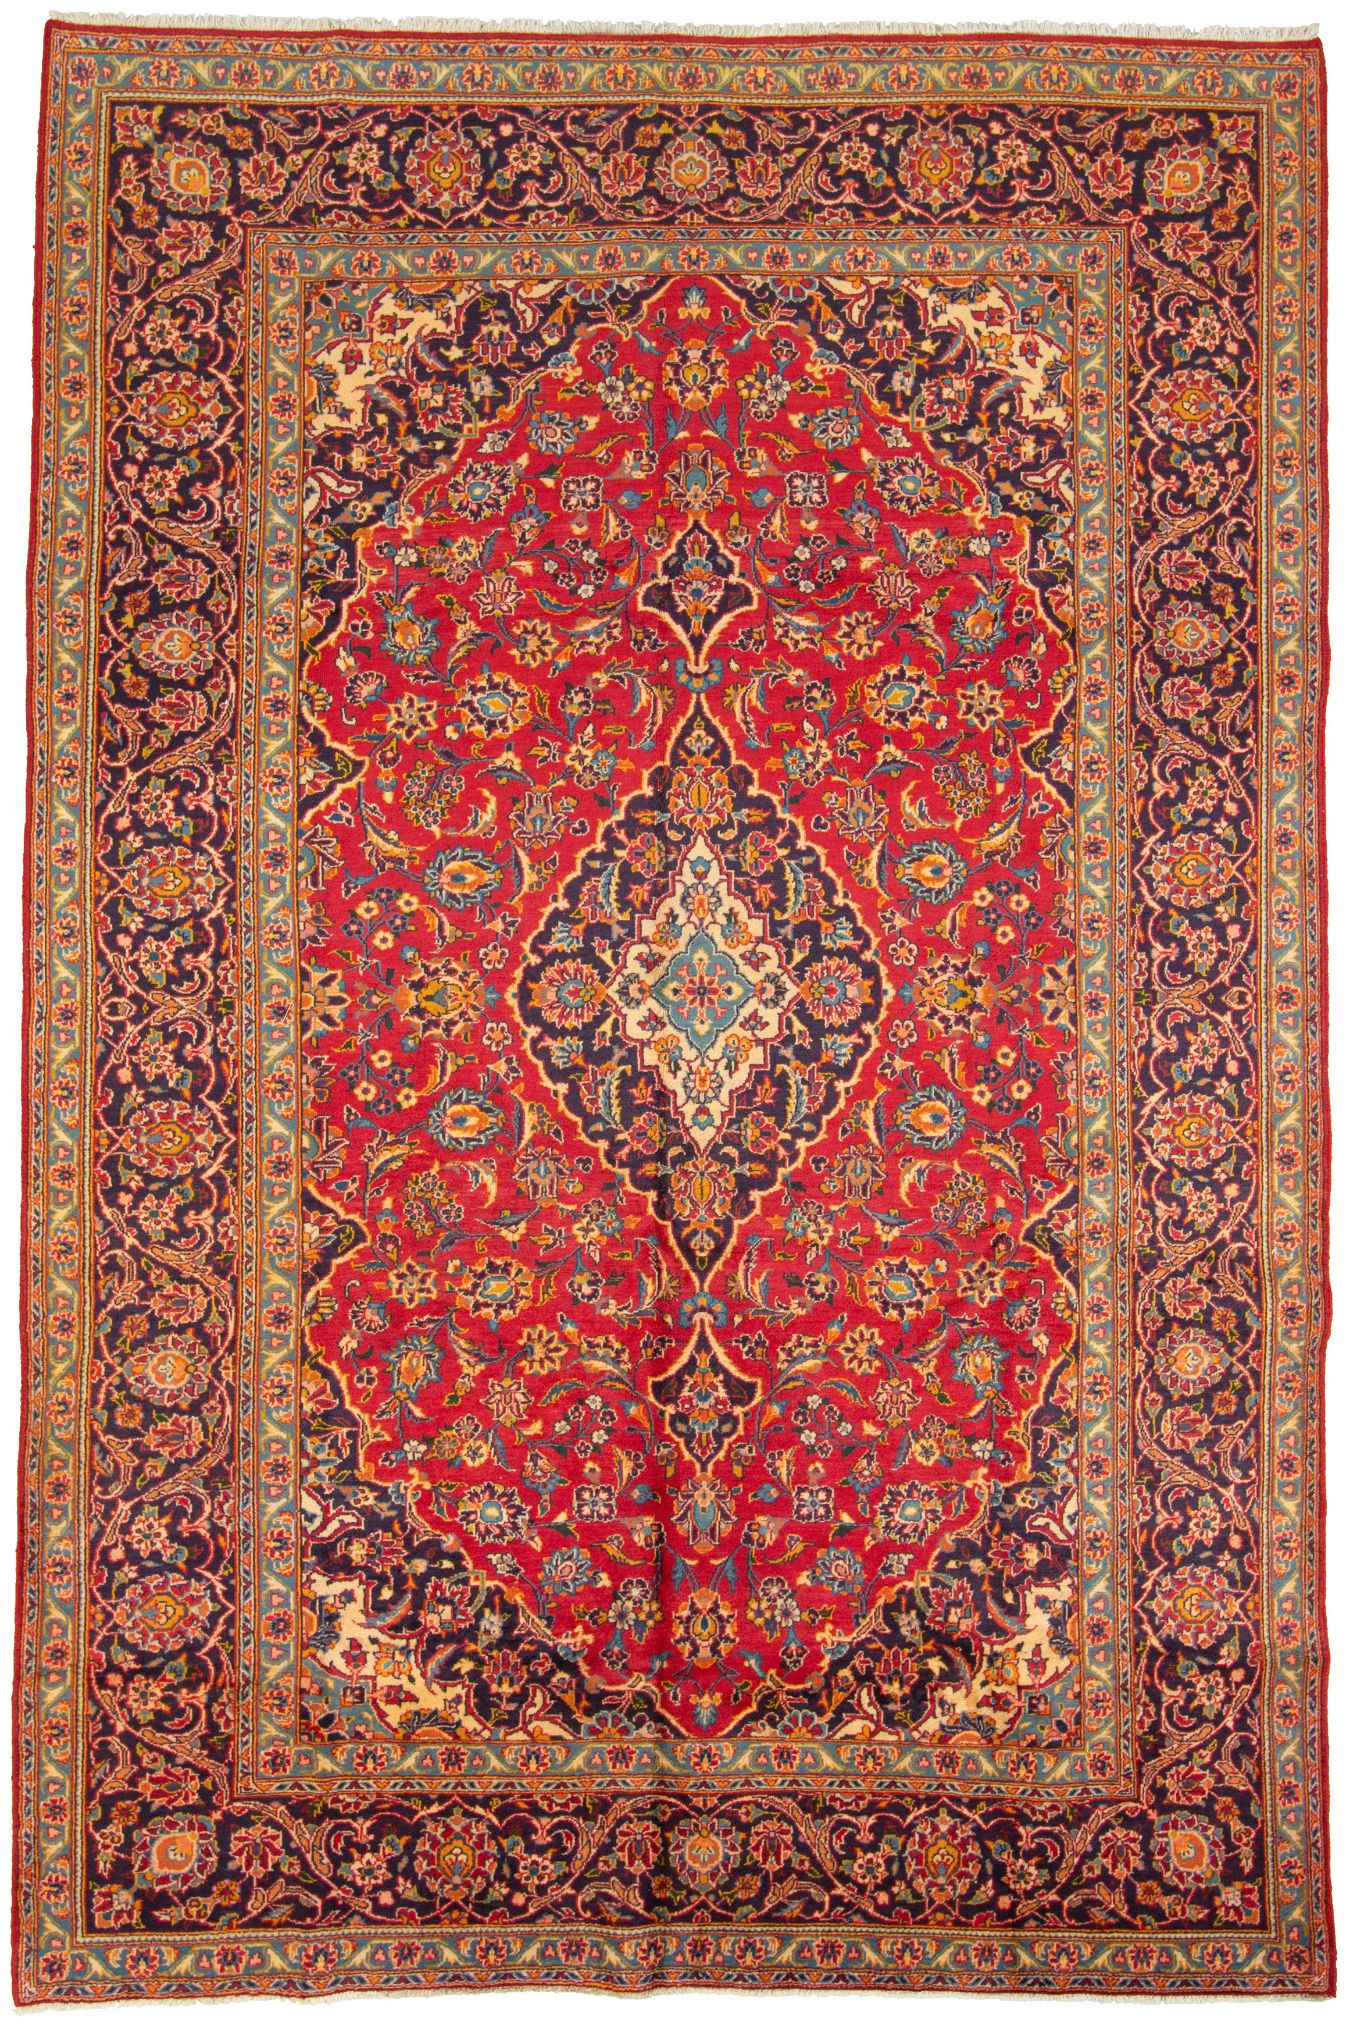 Hand-knotted Kashan  Wool Rug 6'11" x 10'6" Size: 6'11" x 10'6"  